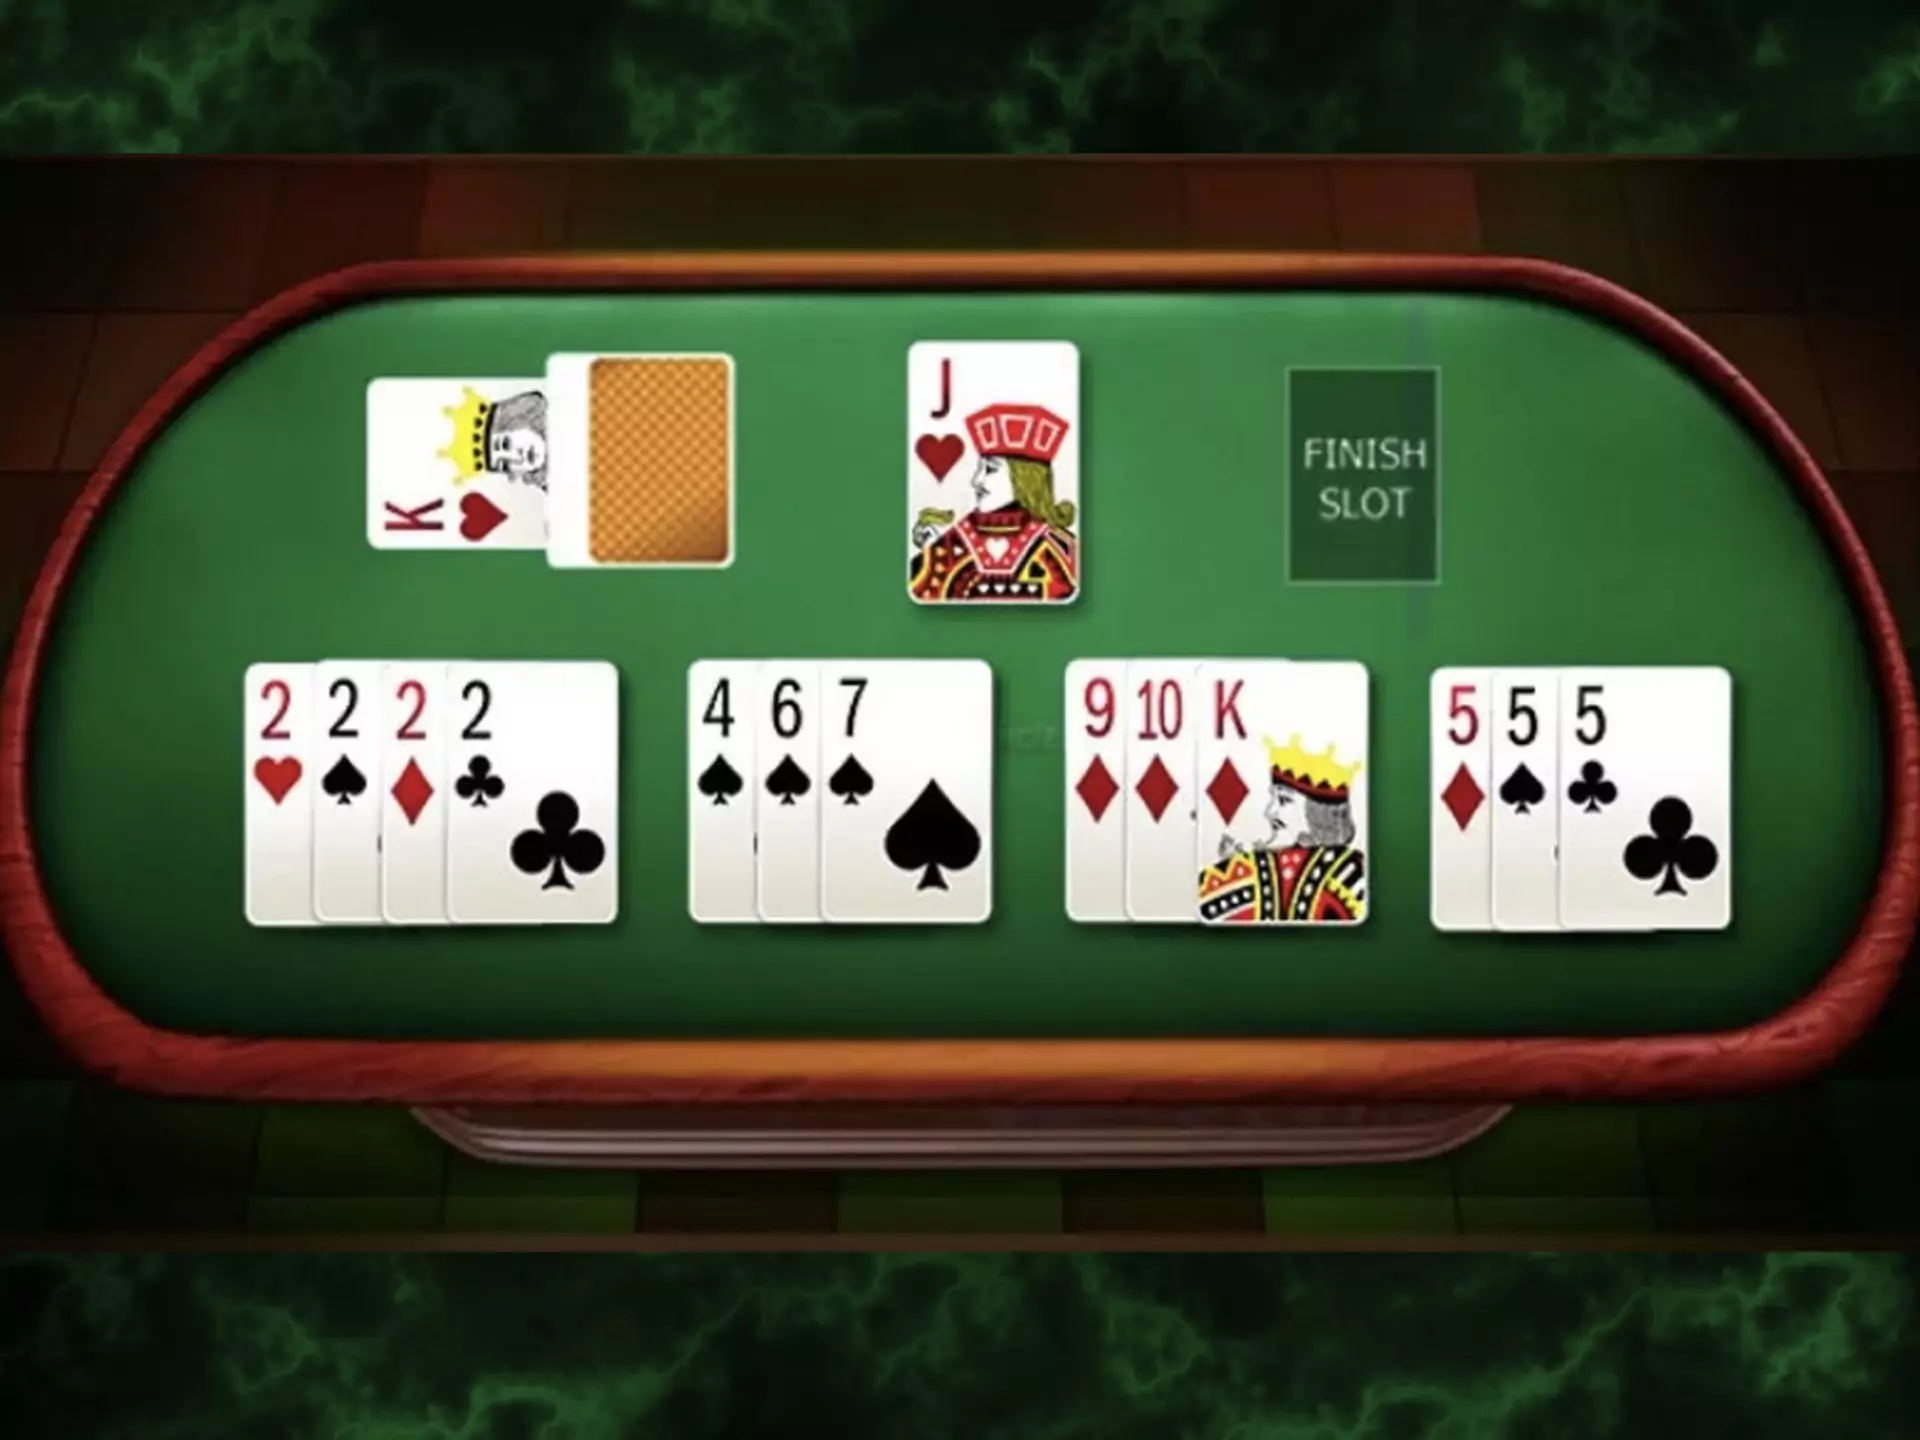 We advise you to learn the rummy rules before playing it at an online casino.